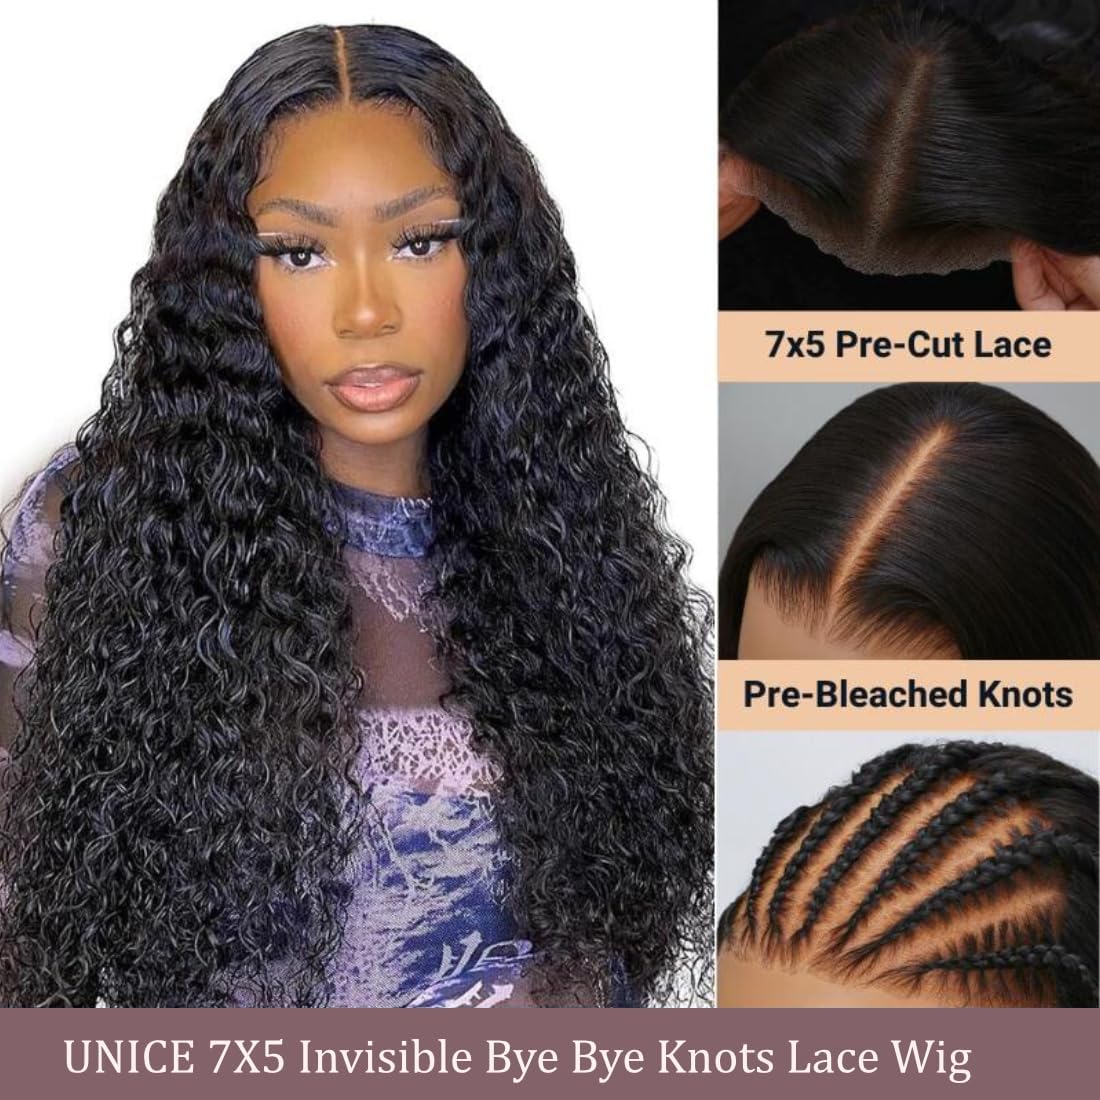 UNICE Bye Bye Knots Wig Invisible Knots Water Wave 7x5 Lace Front Wigs Human Hair Wet and Wavy Put on and Go Glueless Human Hair Wig Pre Plucked Pre Cut Lace 180% Density 24 inch